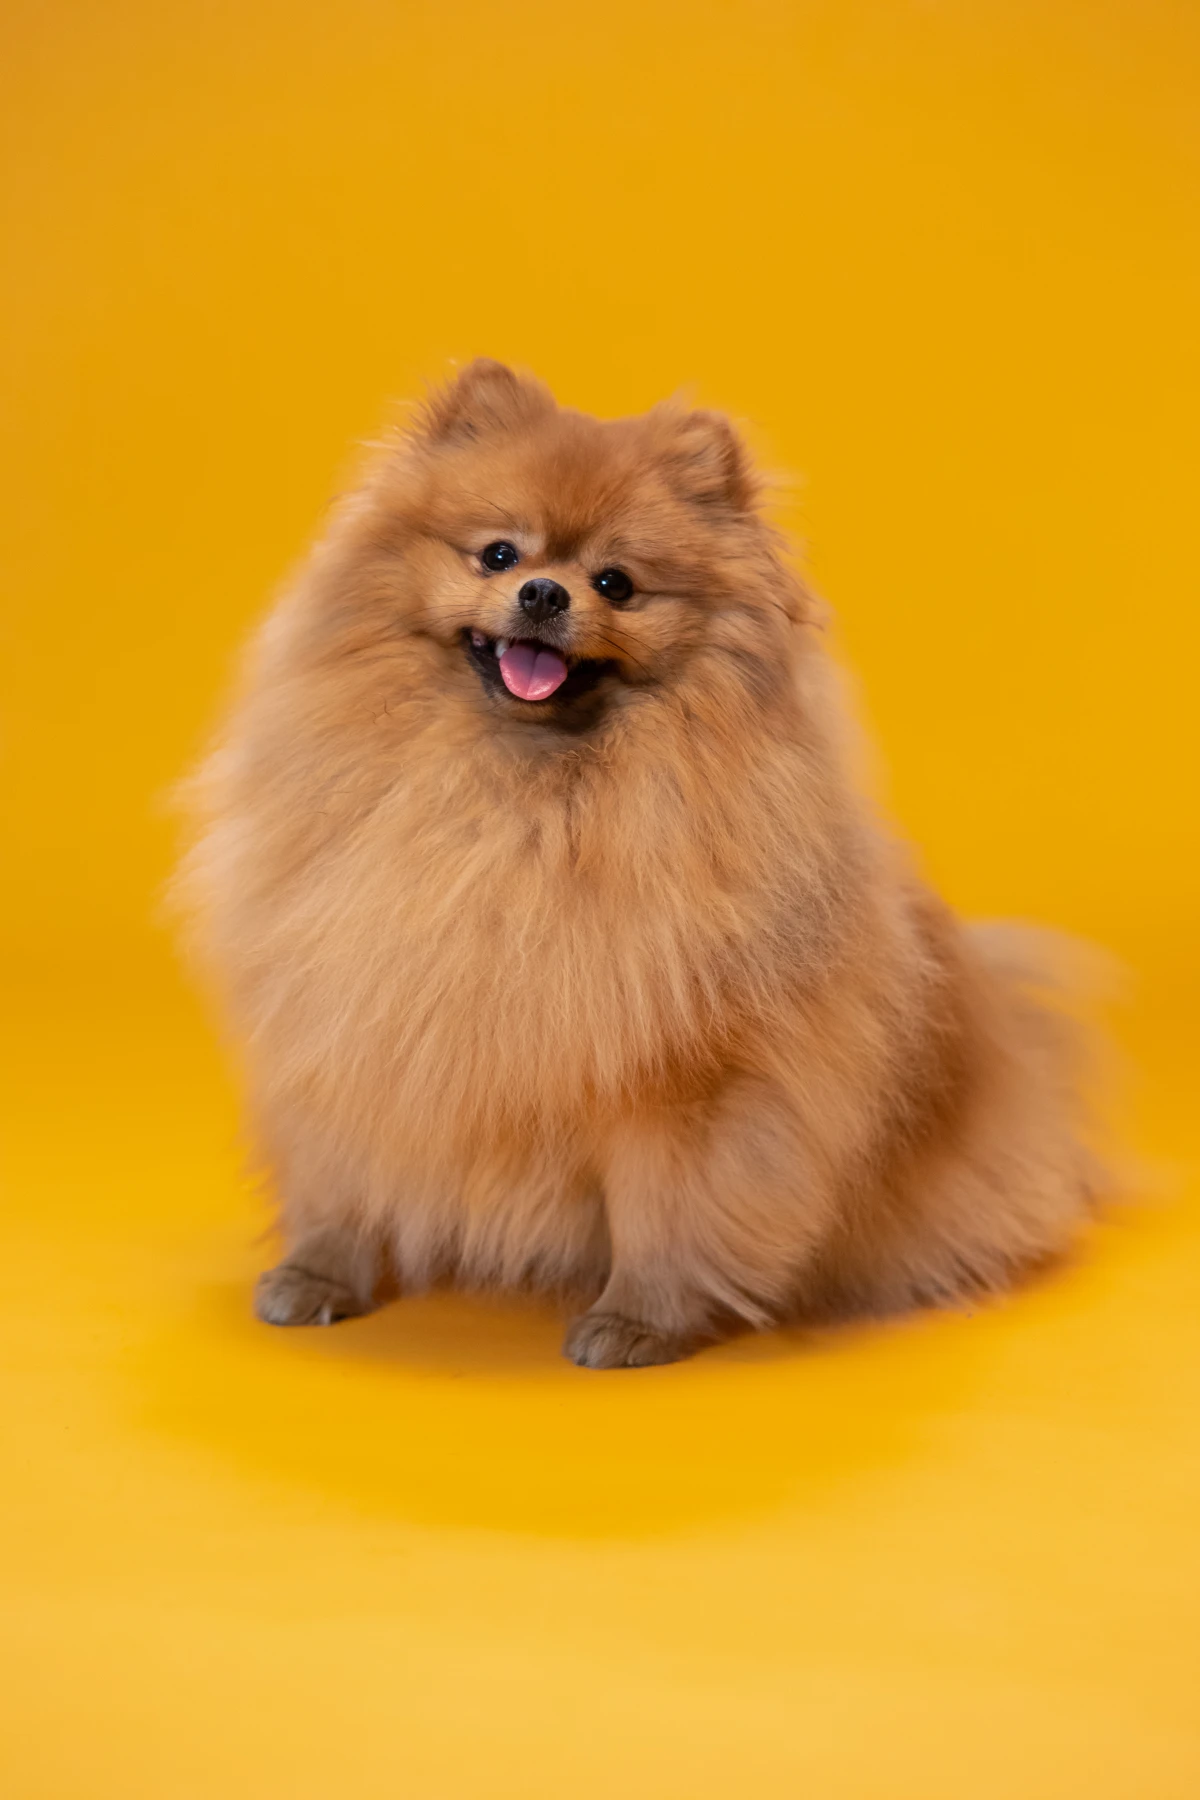 best dog breeds for introverts pomeranian dog on yellow background